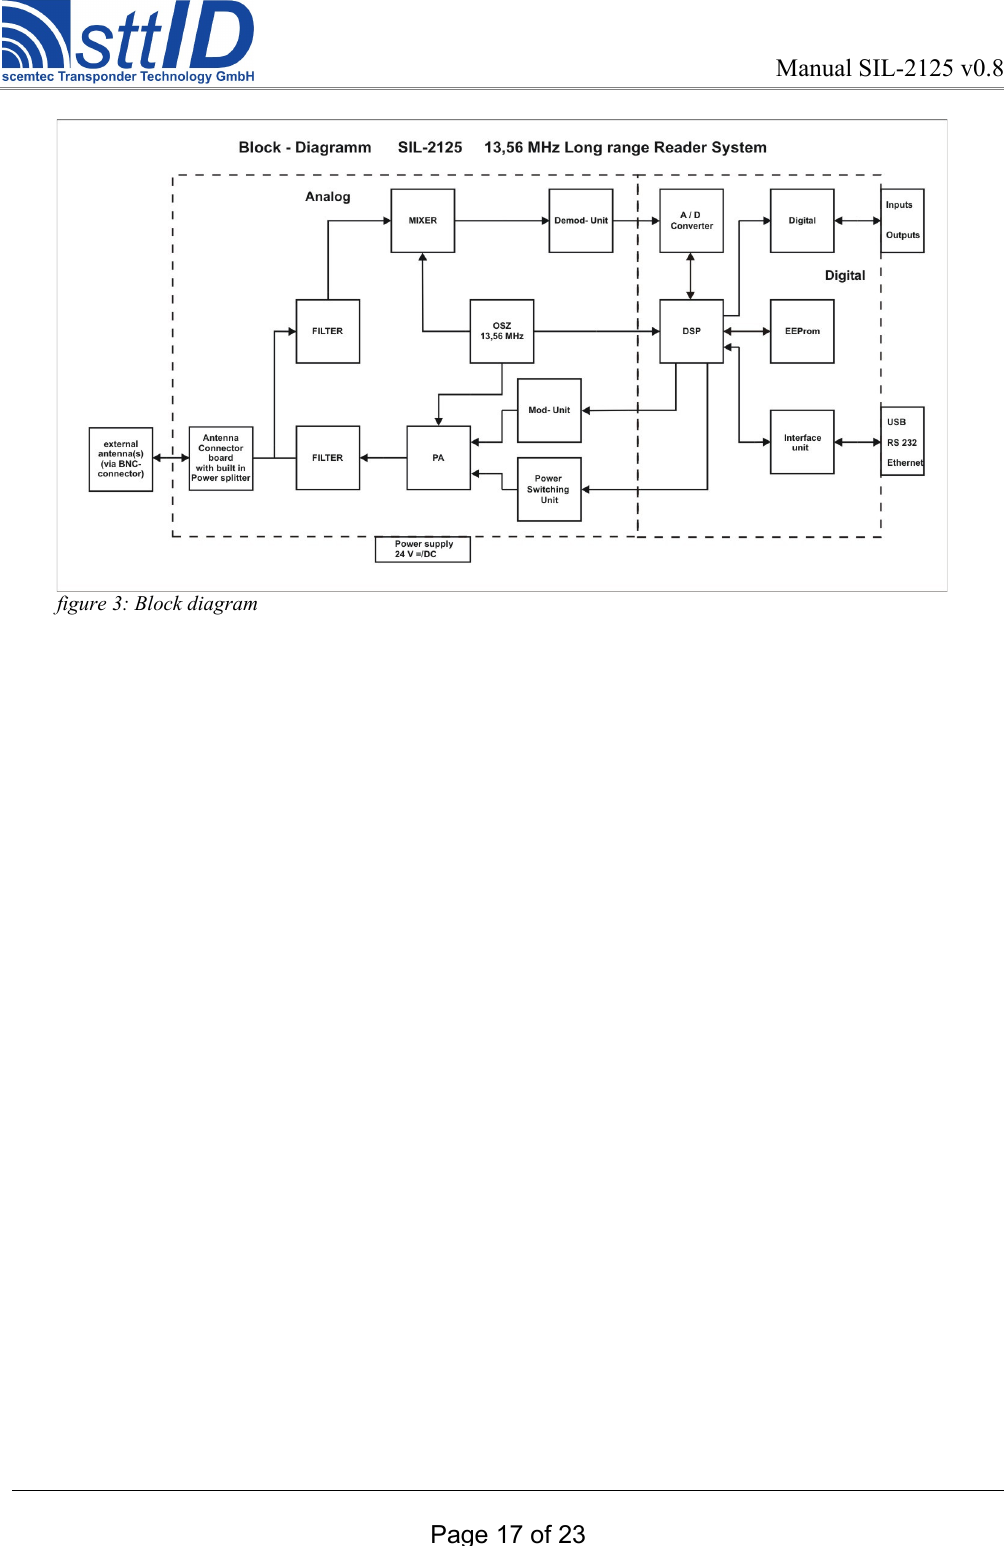 Manual SIL-2125 v0.8 Page 17 of 23figure 3: Block diagram